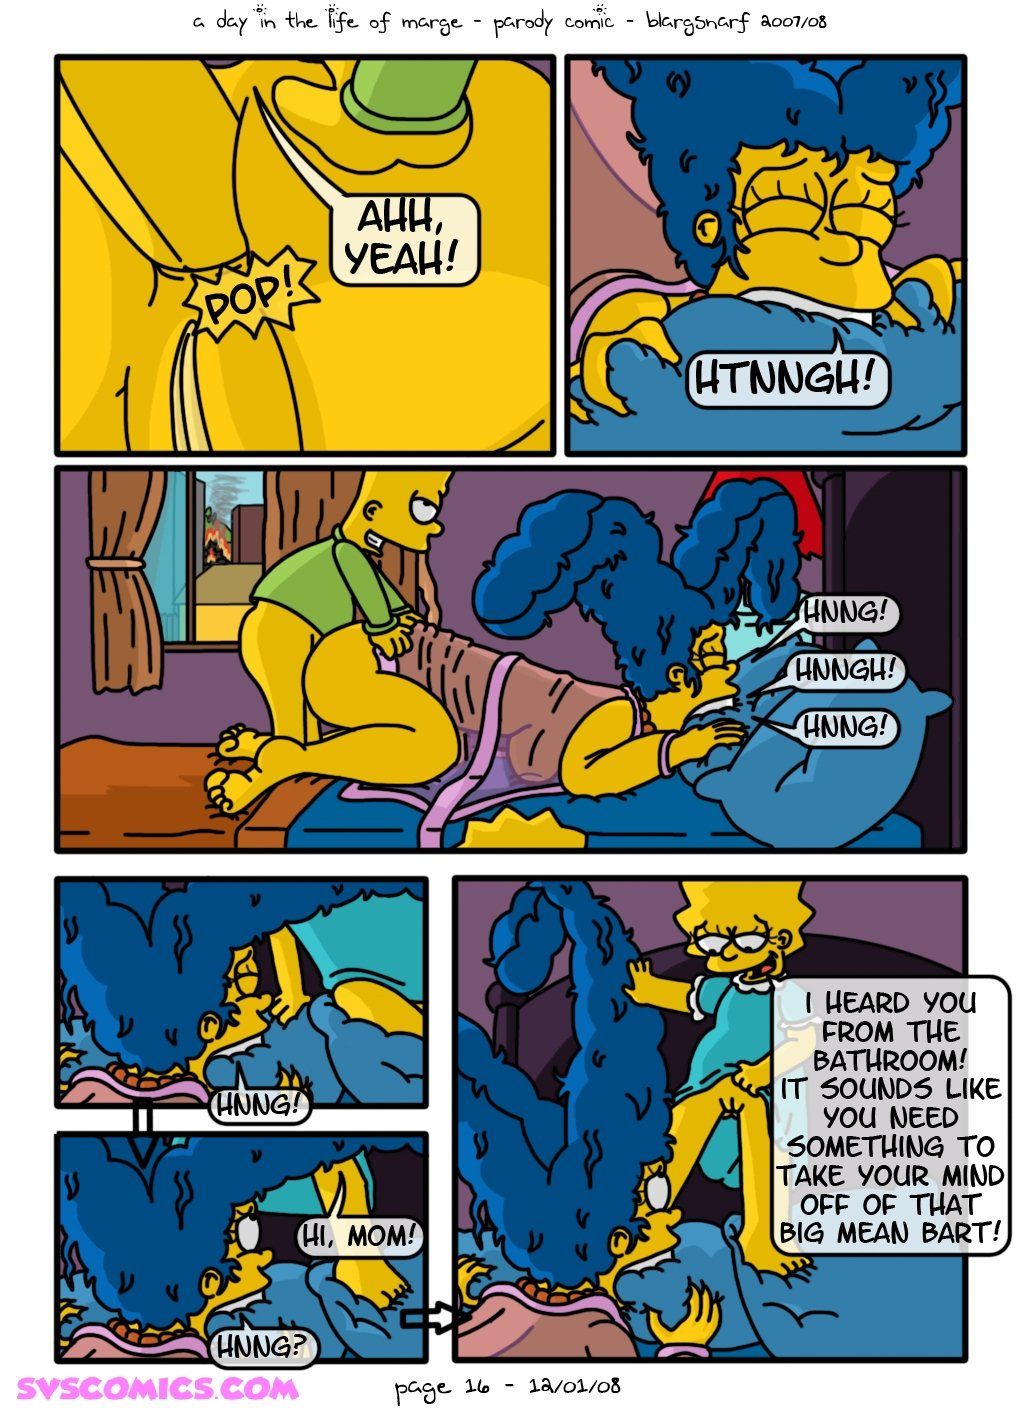 [Blargsnarf] A Day Life of Marge (The Simpsons) page 17